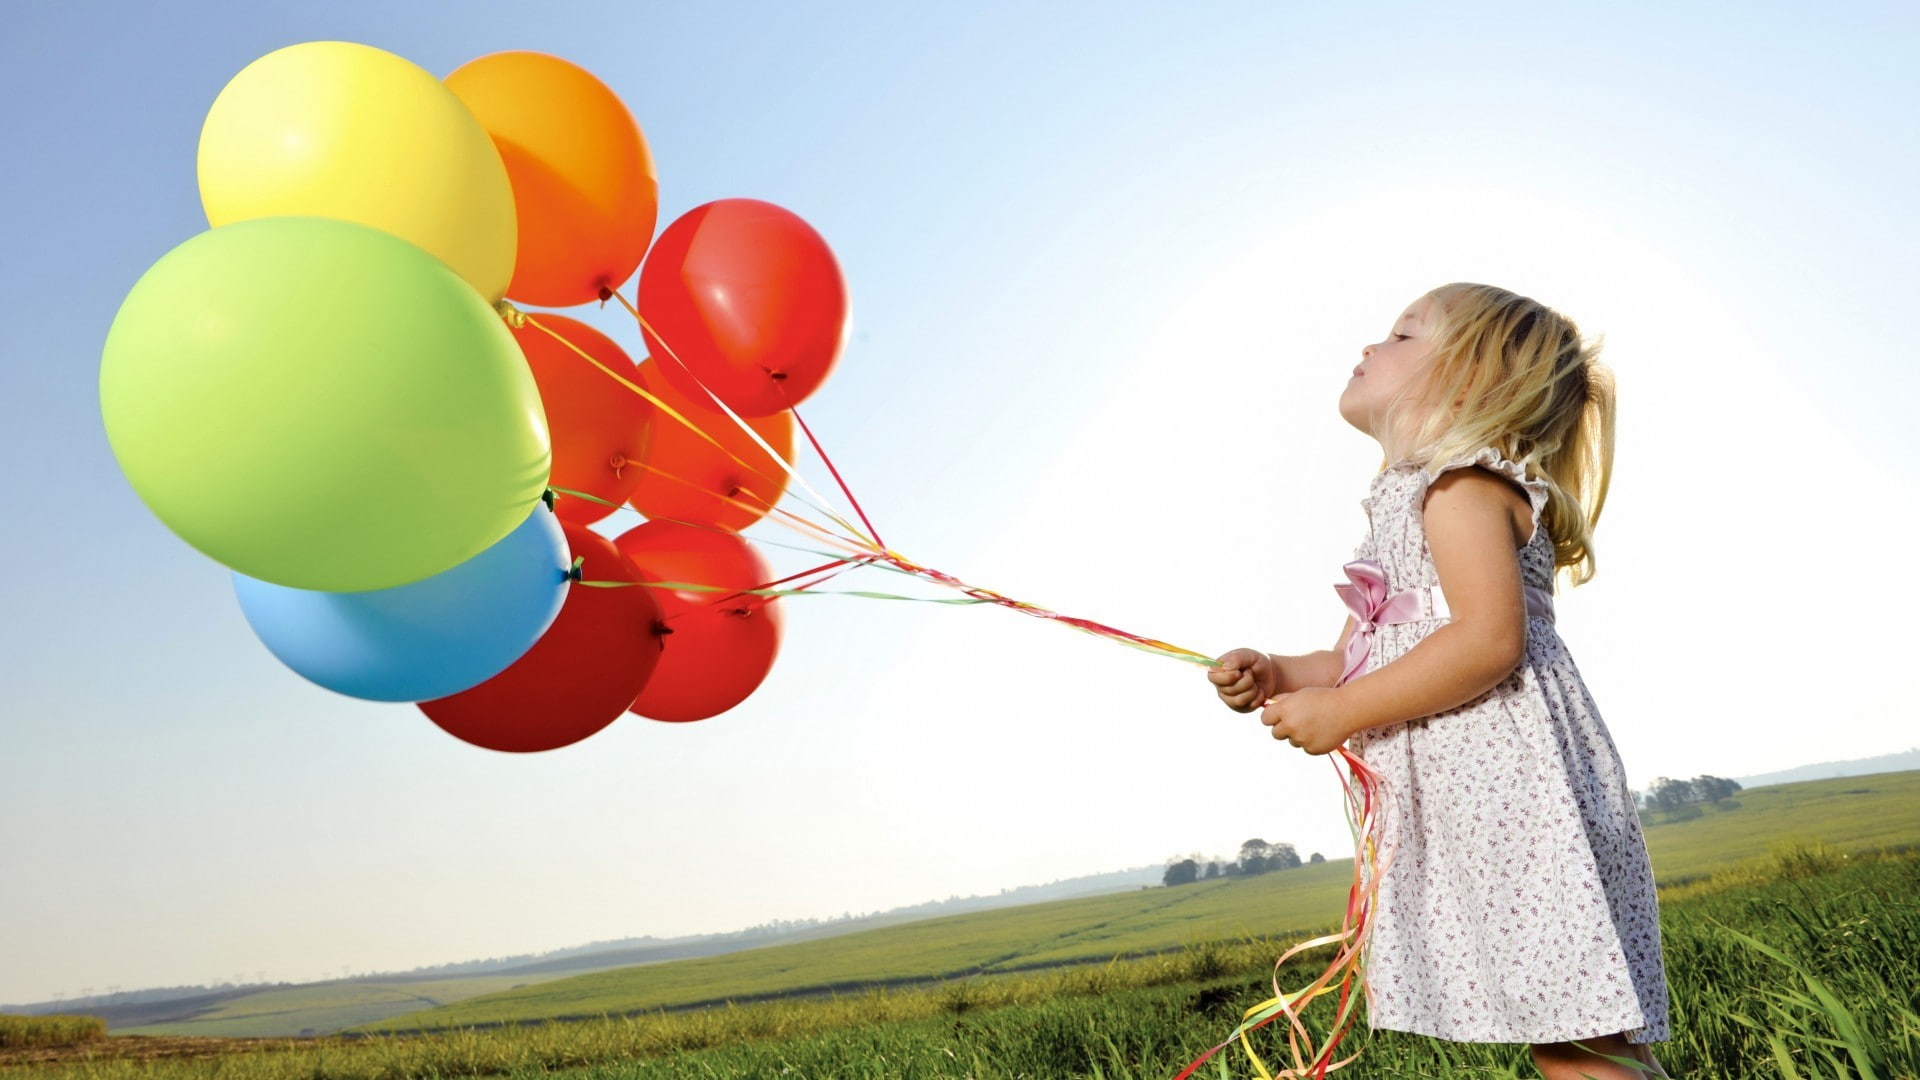 balloon, children, field, colorful, knot, blonde, holding, girls